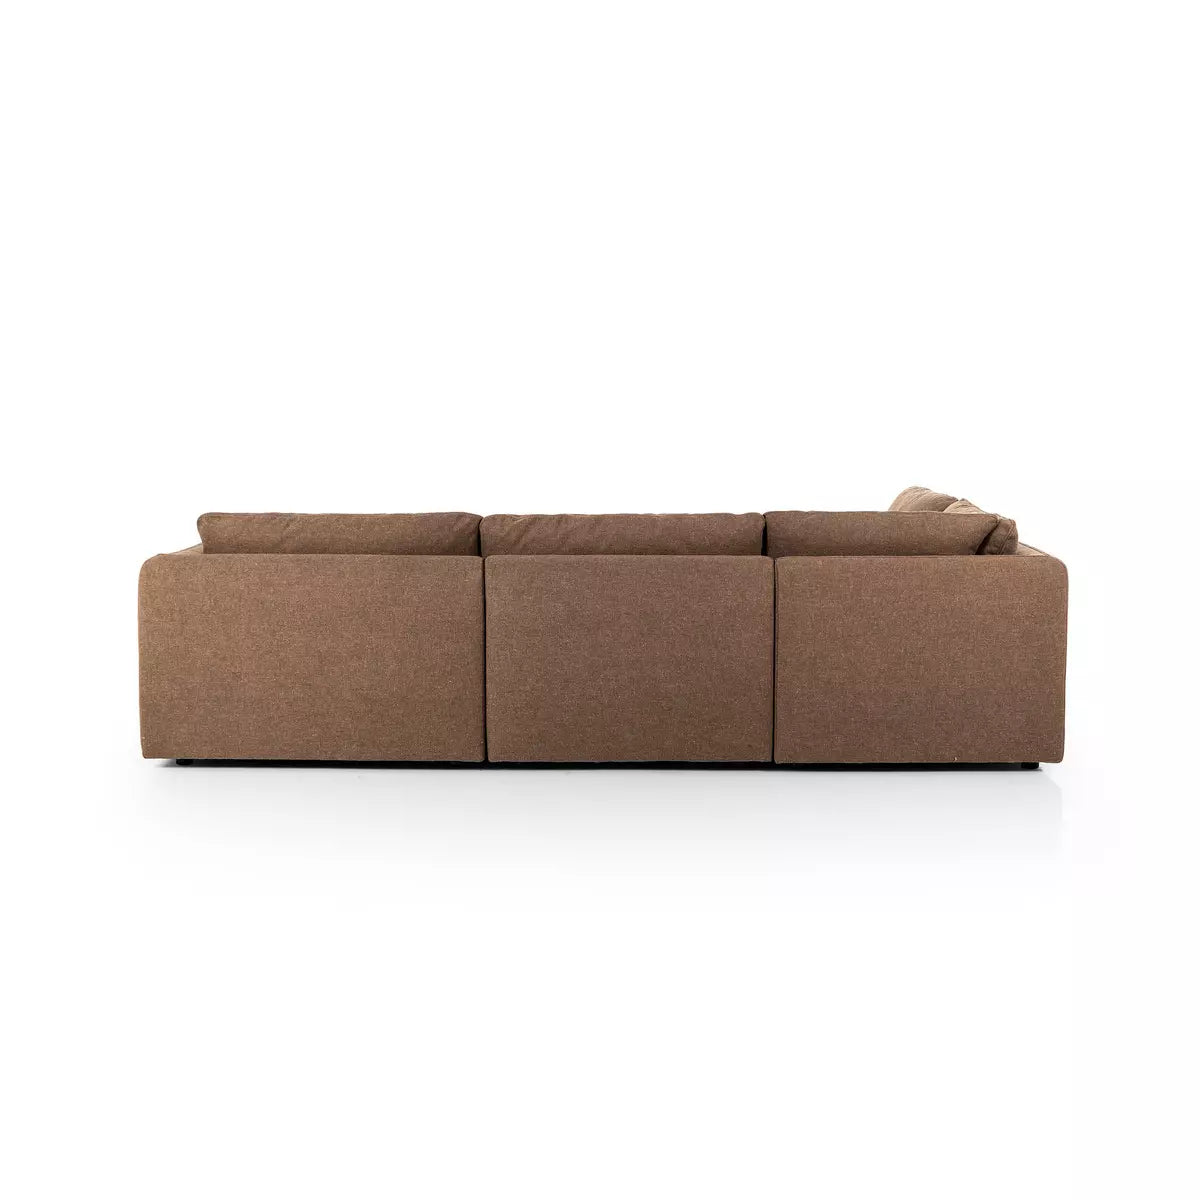 Ingel 4-Piece Sectional W/ Ottoman Right Arm Facing Antwerp Cafe